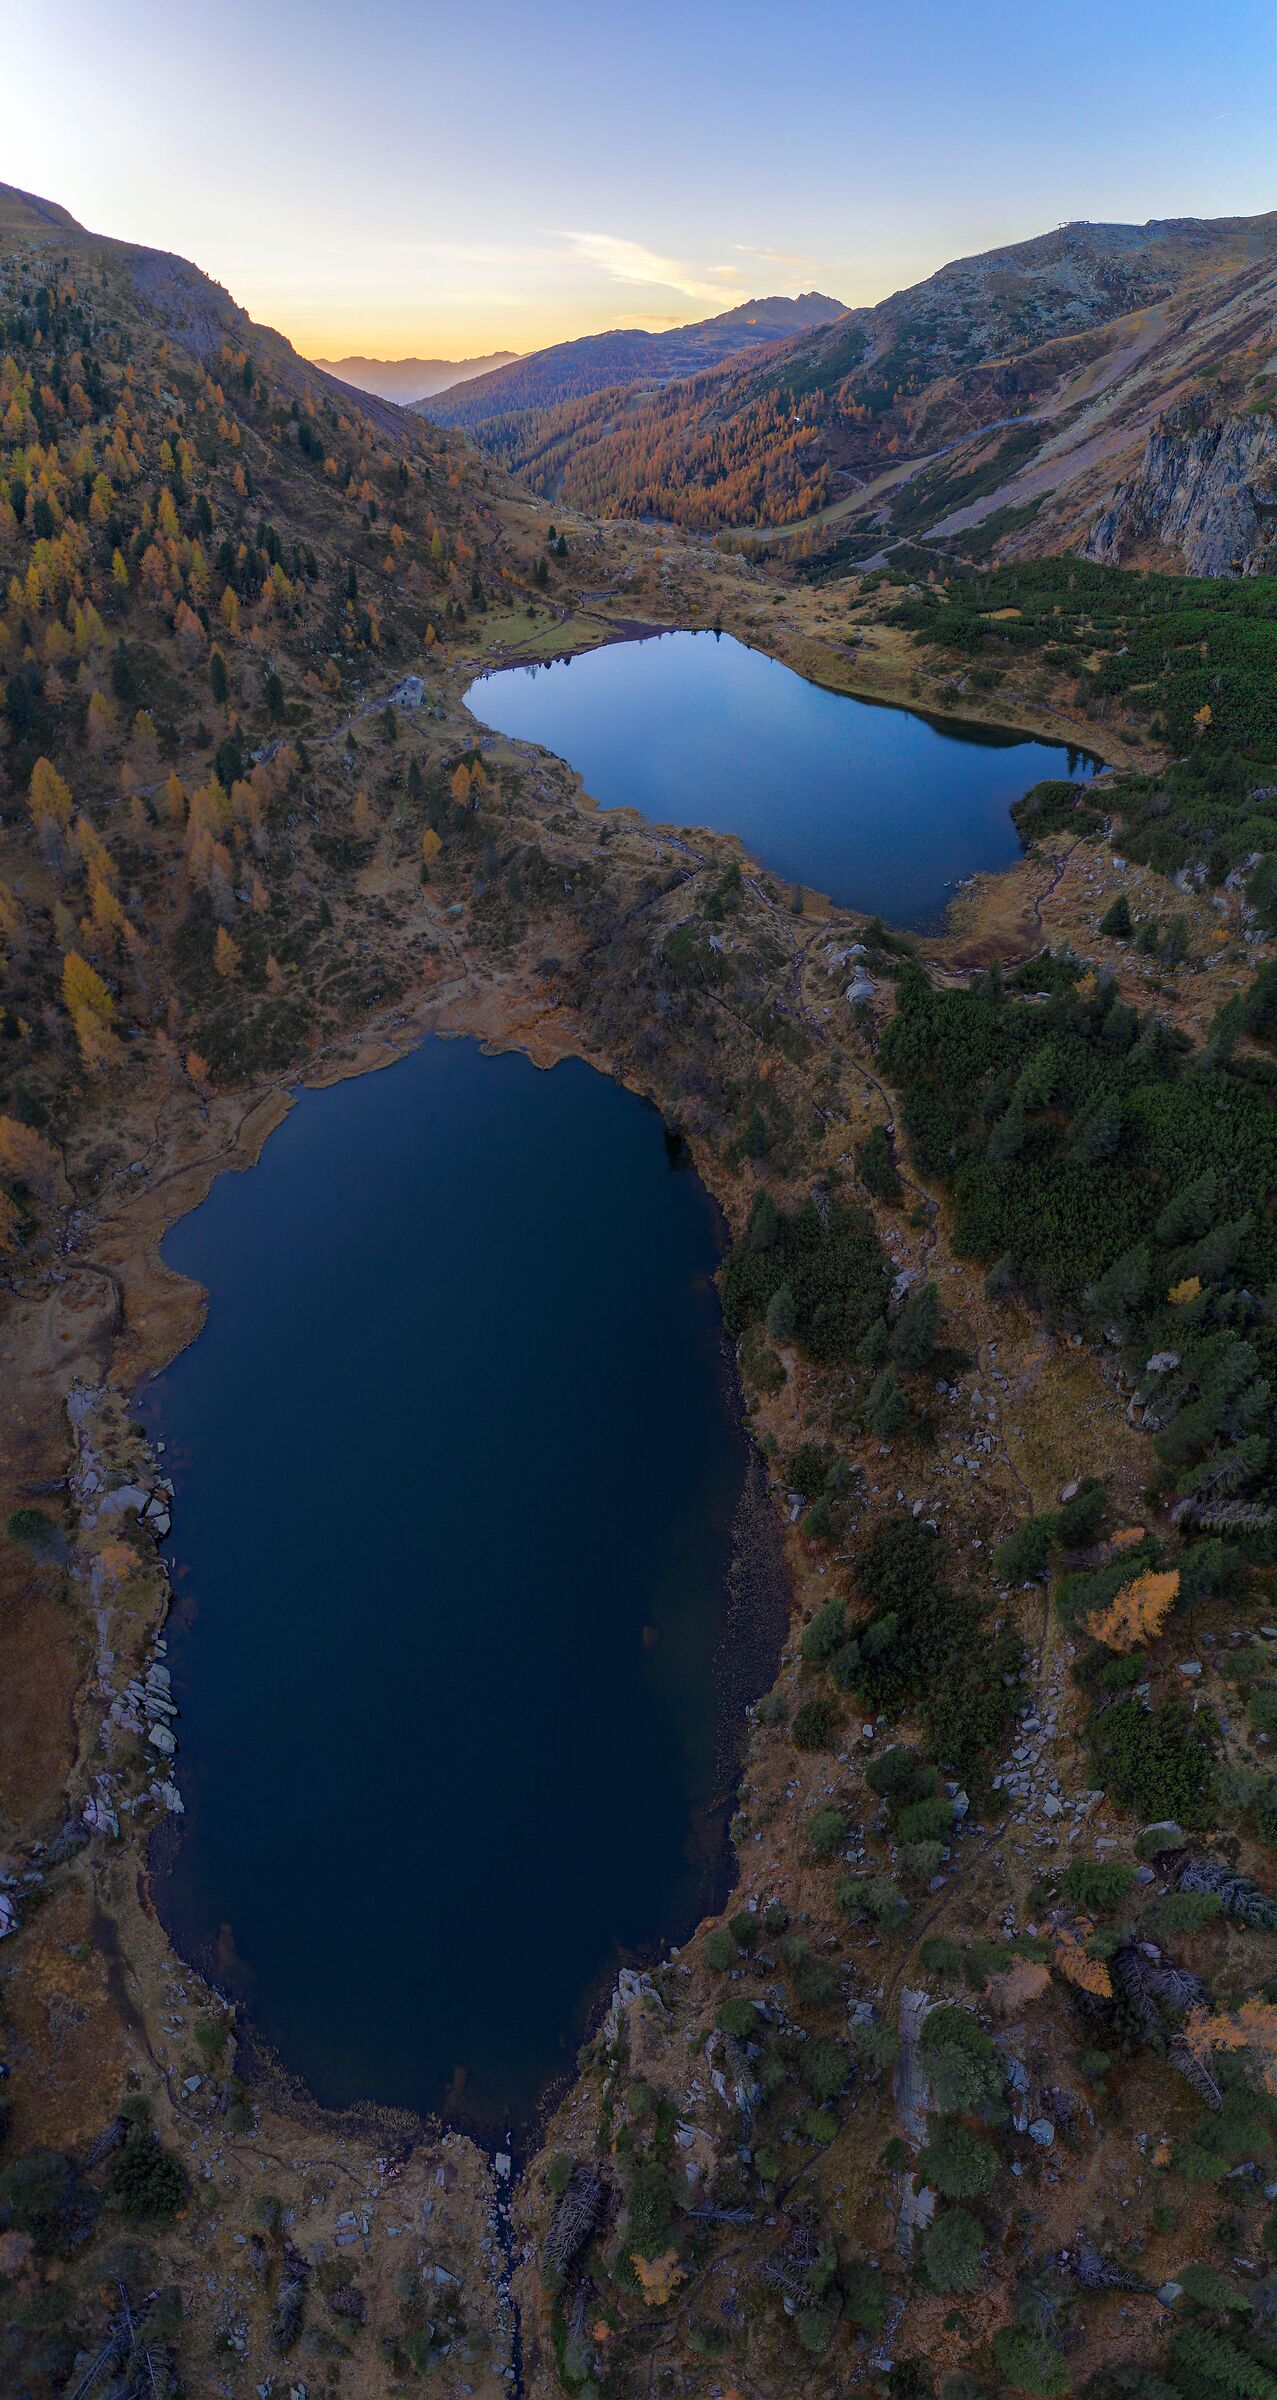 Overview of Colbricon Lakes from drone...